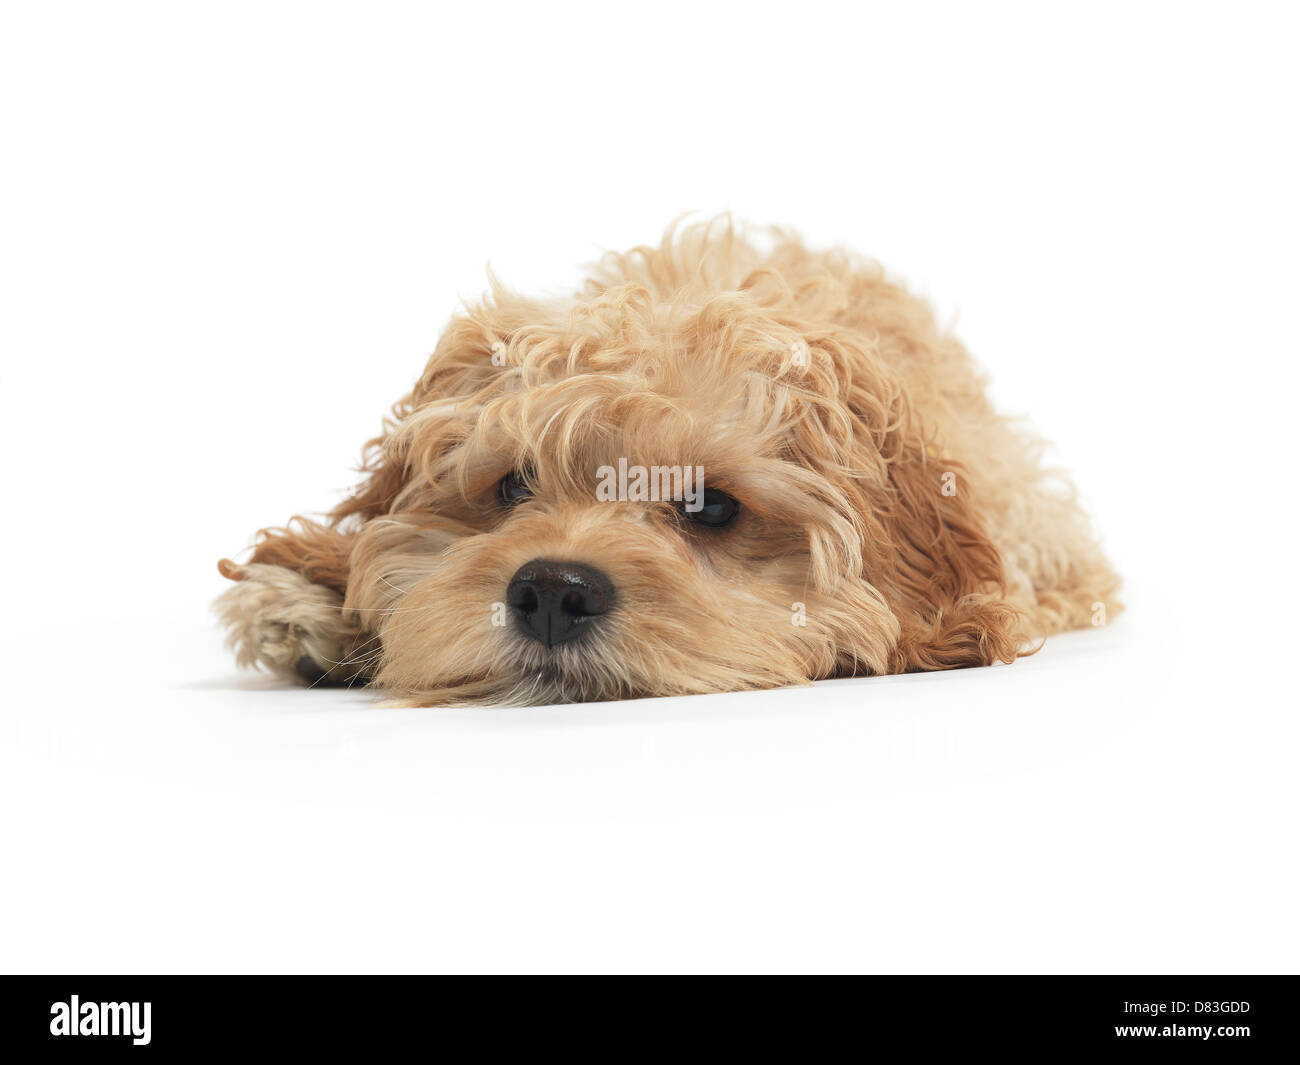 License available at MaximImages.com - Cockapoo cute cross breed dog of cocker spaniel and a poodle lying down isolated on white background Stock Photo